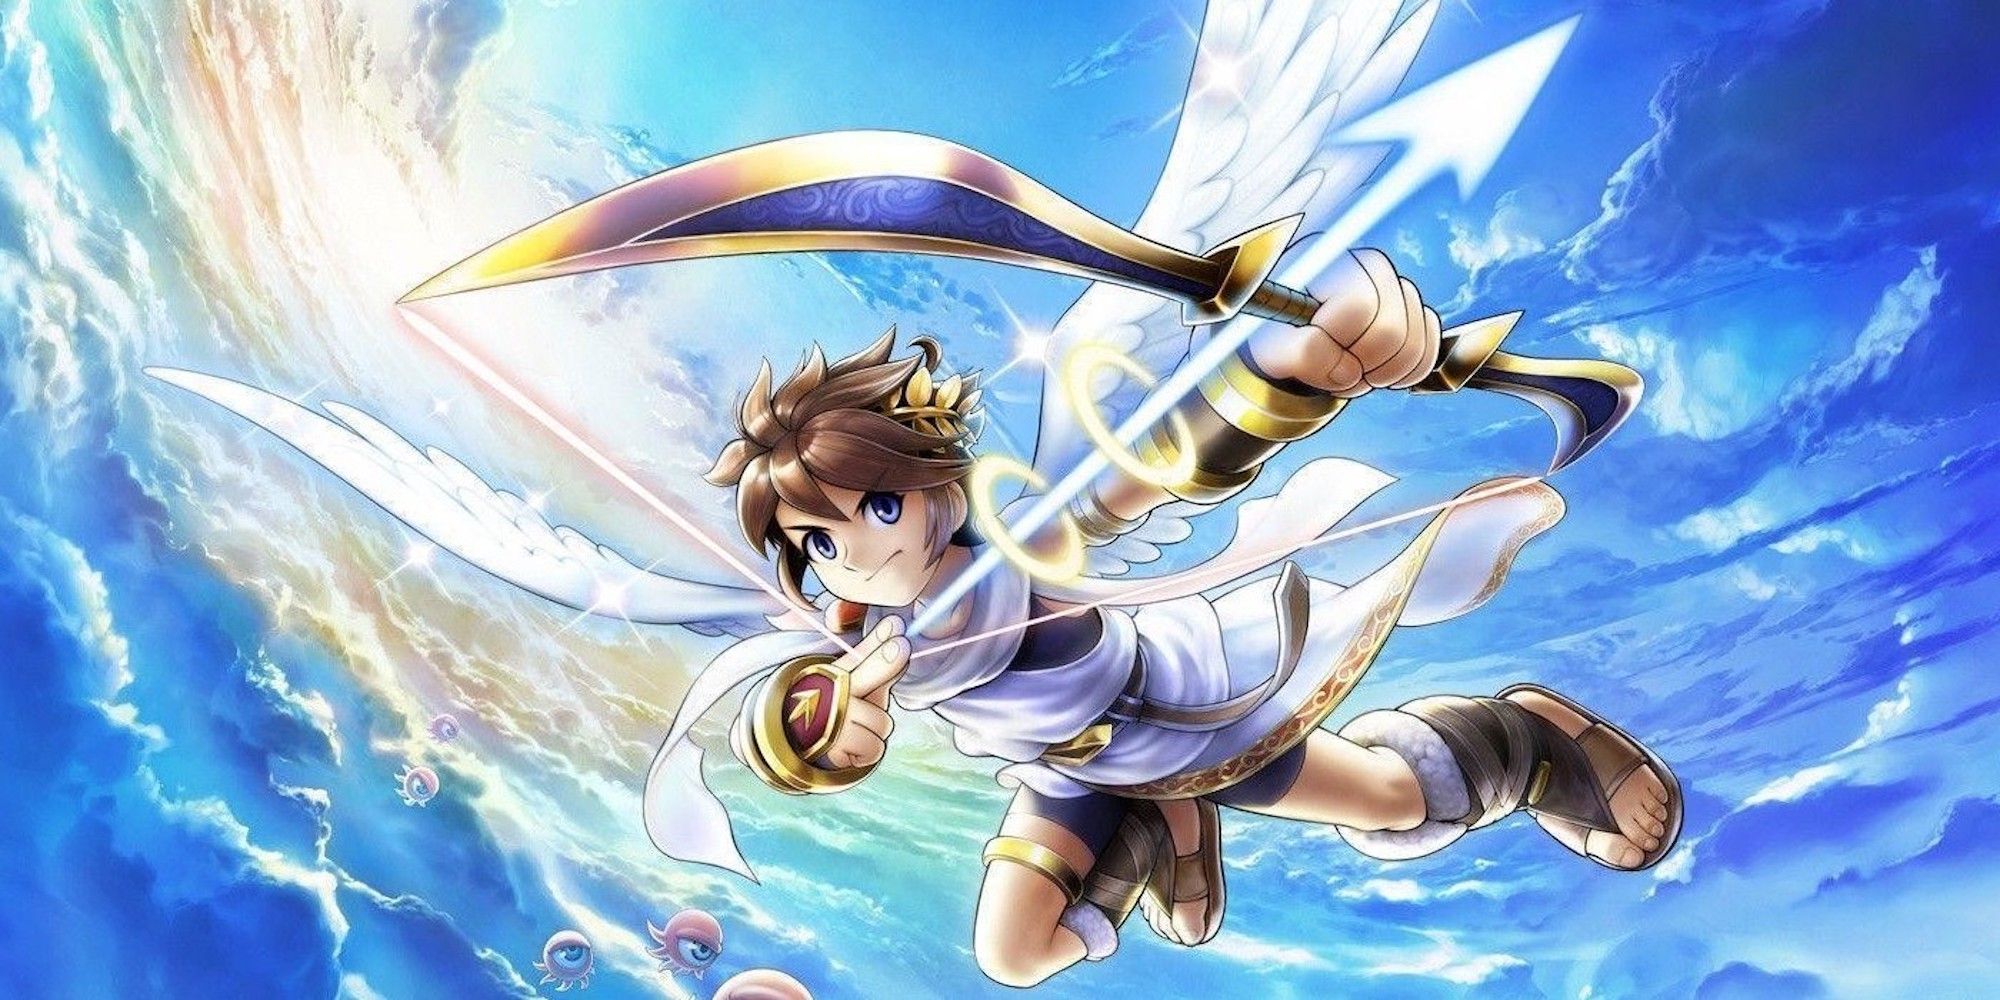 Pit holding a bow and arrow and flying in Kid Icarus Uprising